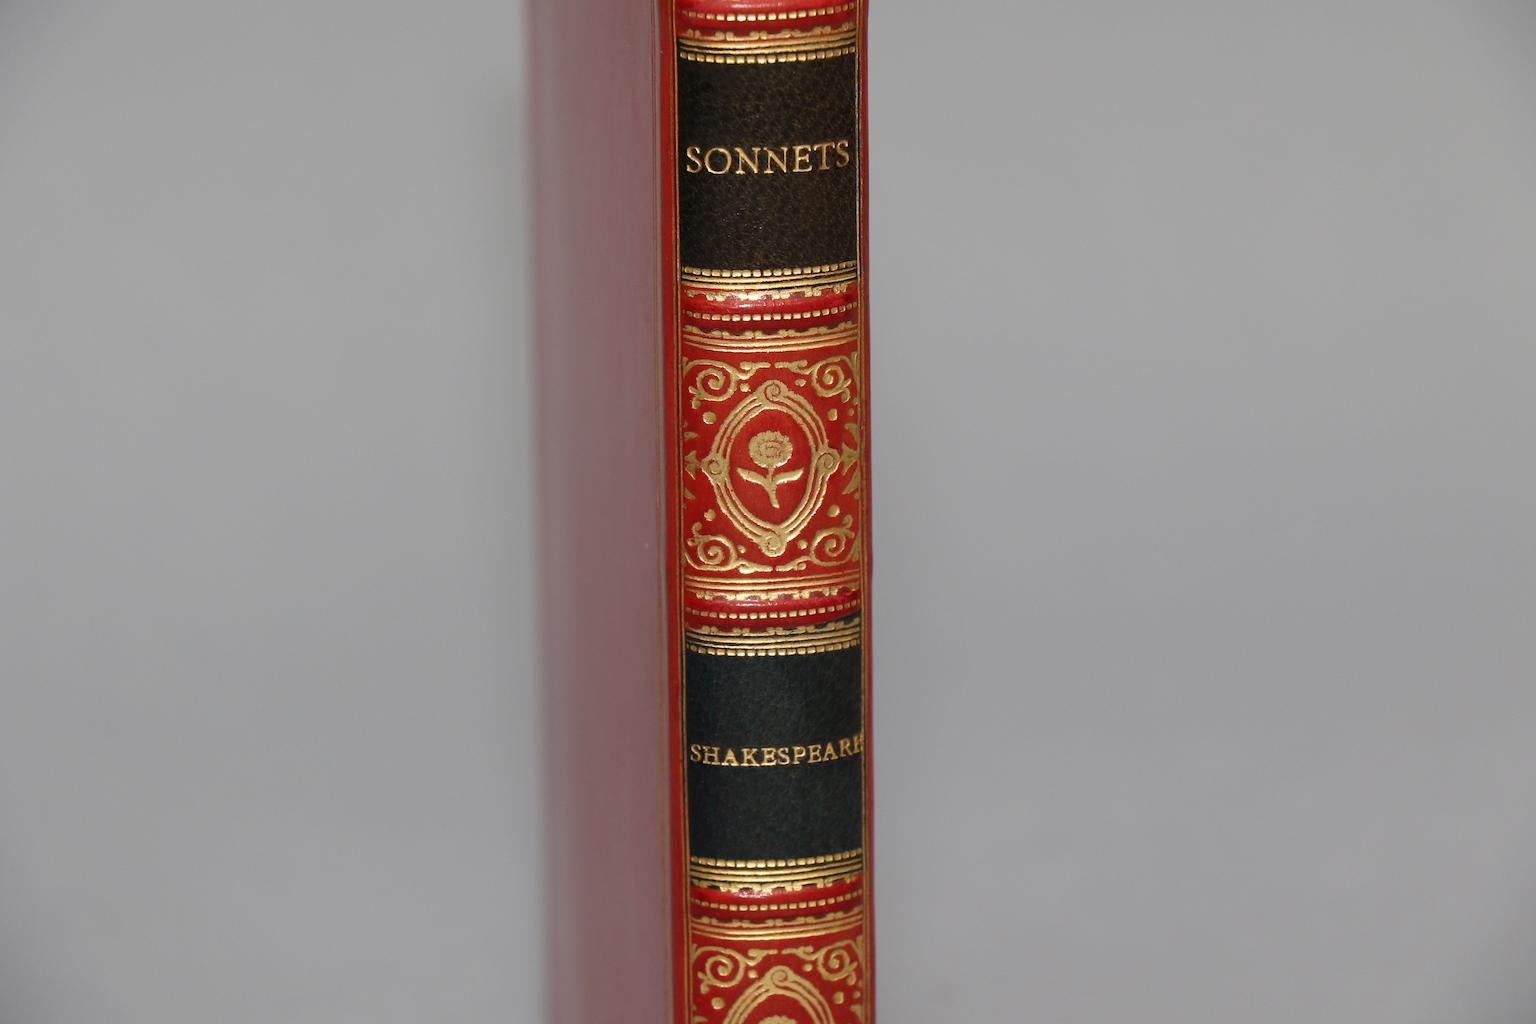 Leatherbound. One volume. Bound in full red calf by Riviere with all edges gilt, raised bands, gilt panels, & colored frontispiece. In a slipcase. Very good. Published in London by Robert Riviere & Sons in 1928.

All listed dimensions are for a